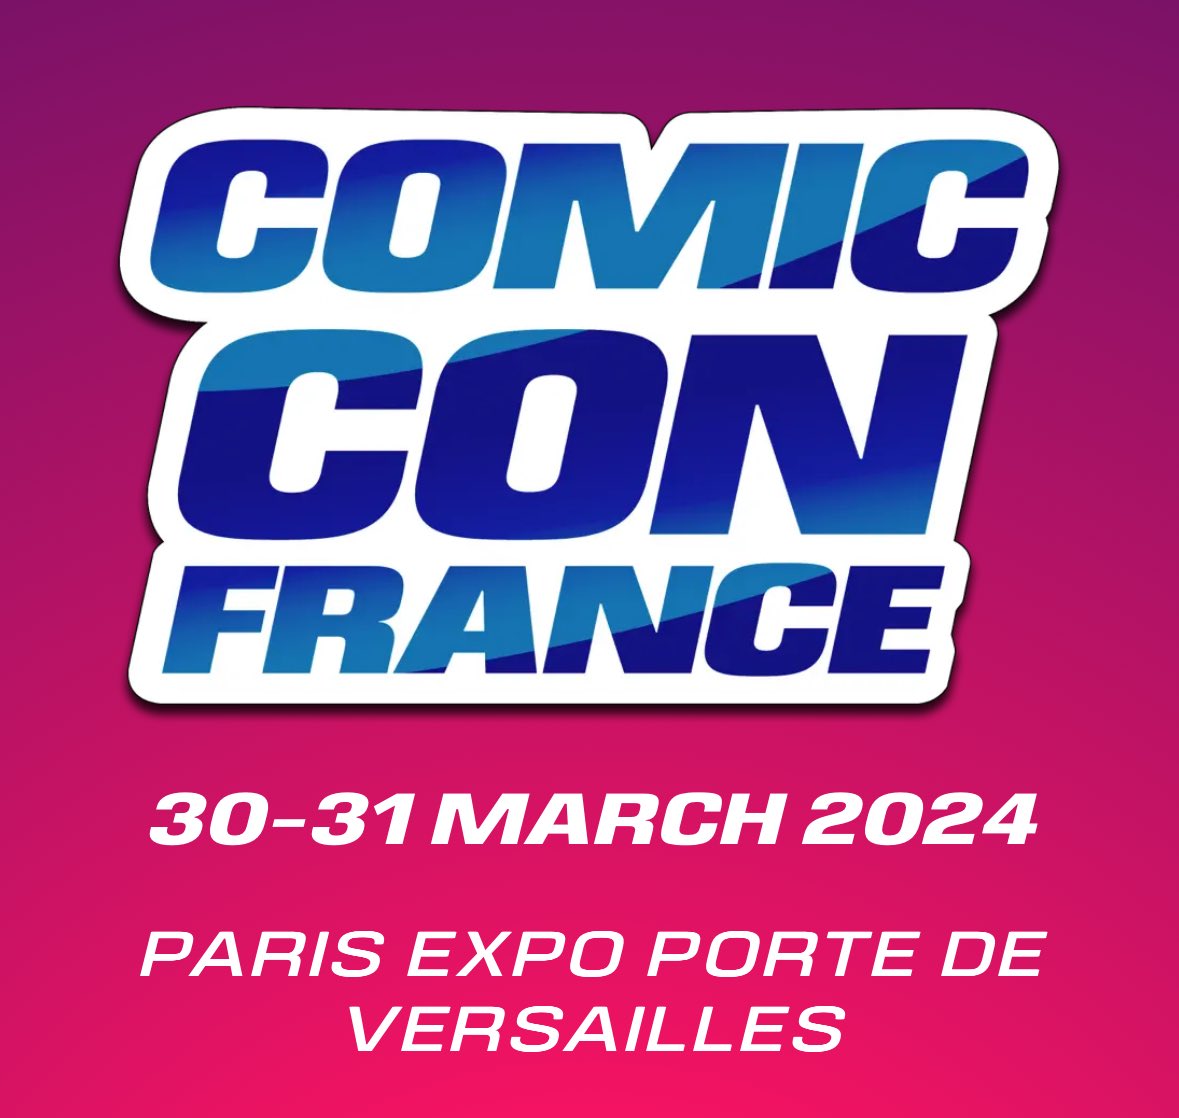 🎶🎵🎶 “April in Paris” (and the very end of March at Comic Con France). Instead of Elm Street, Freddy will be stalking chocolate bunnies on the Champs-Elysees @comicconfrance